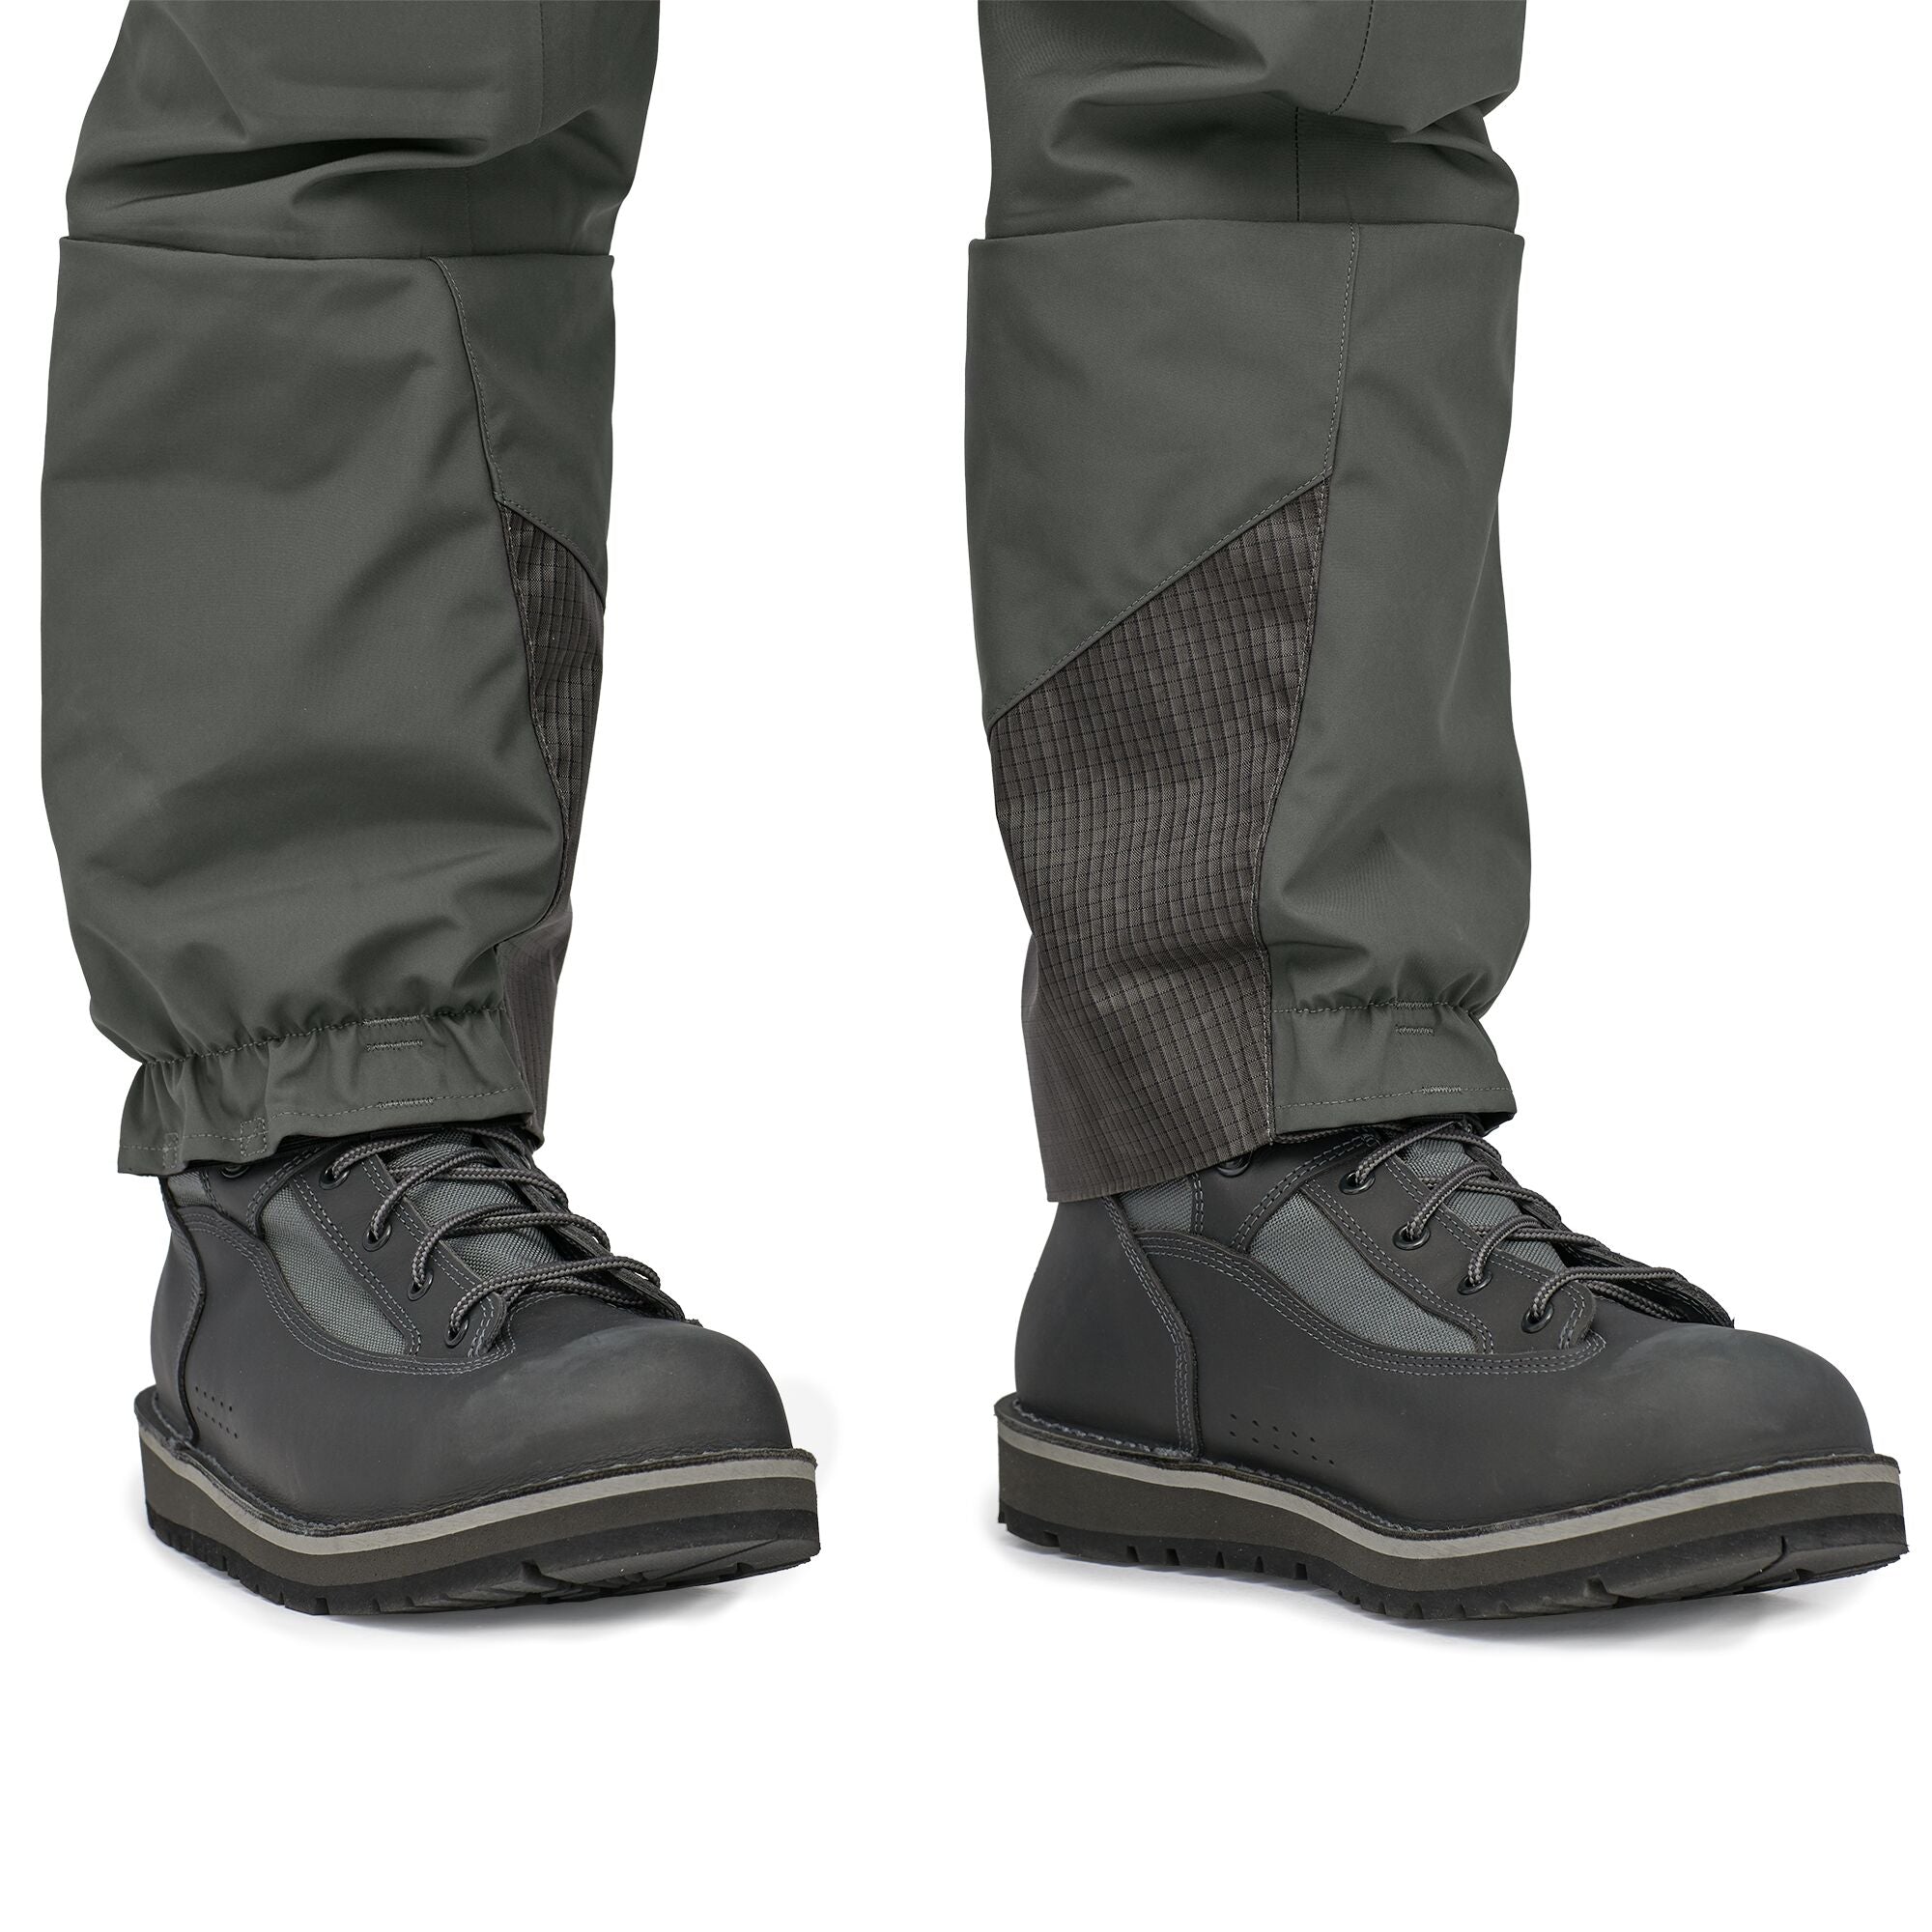 Patagonia Waders ON SALE at GONE FISHIN